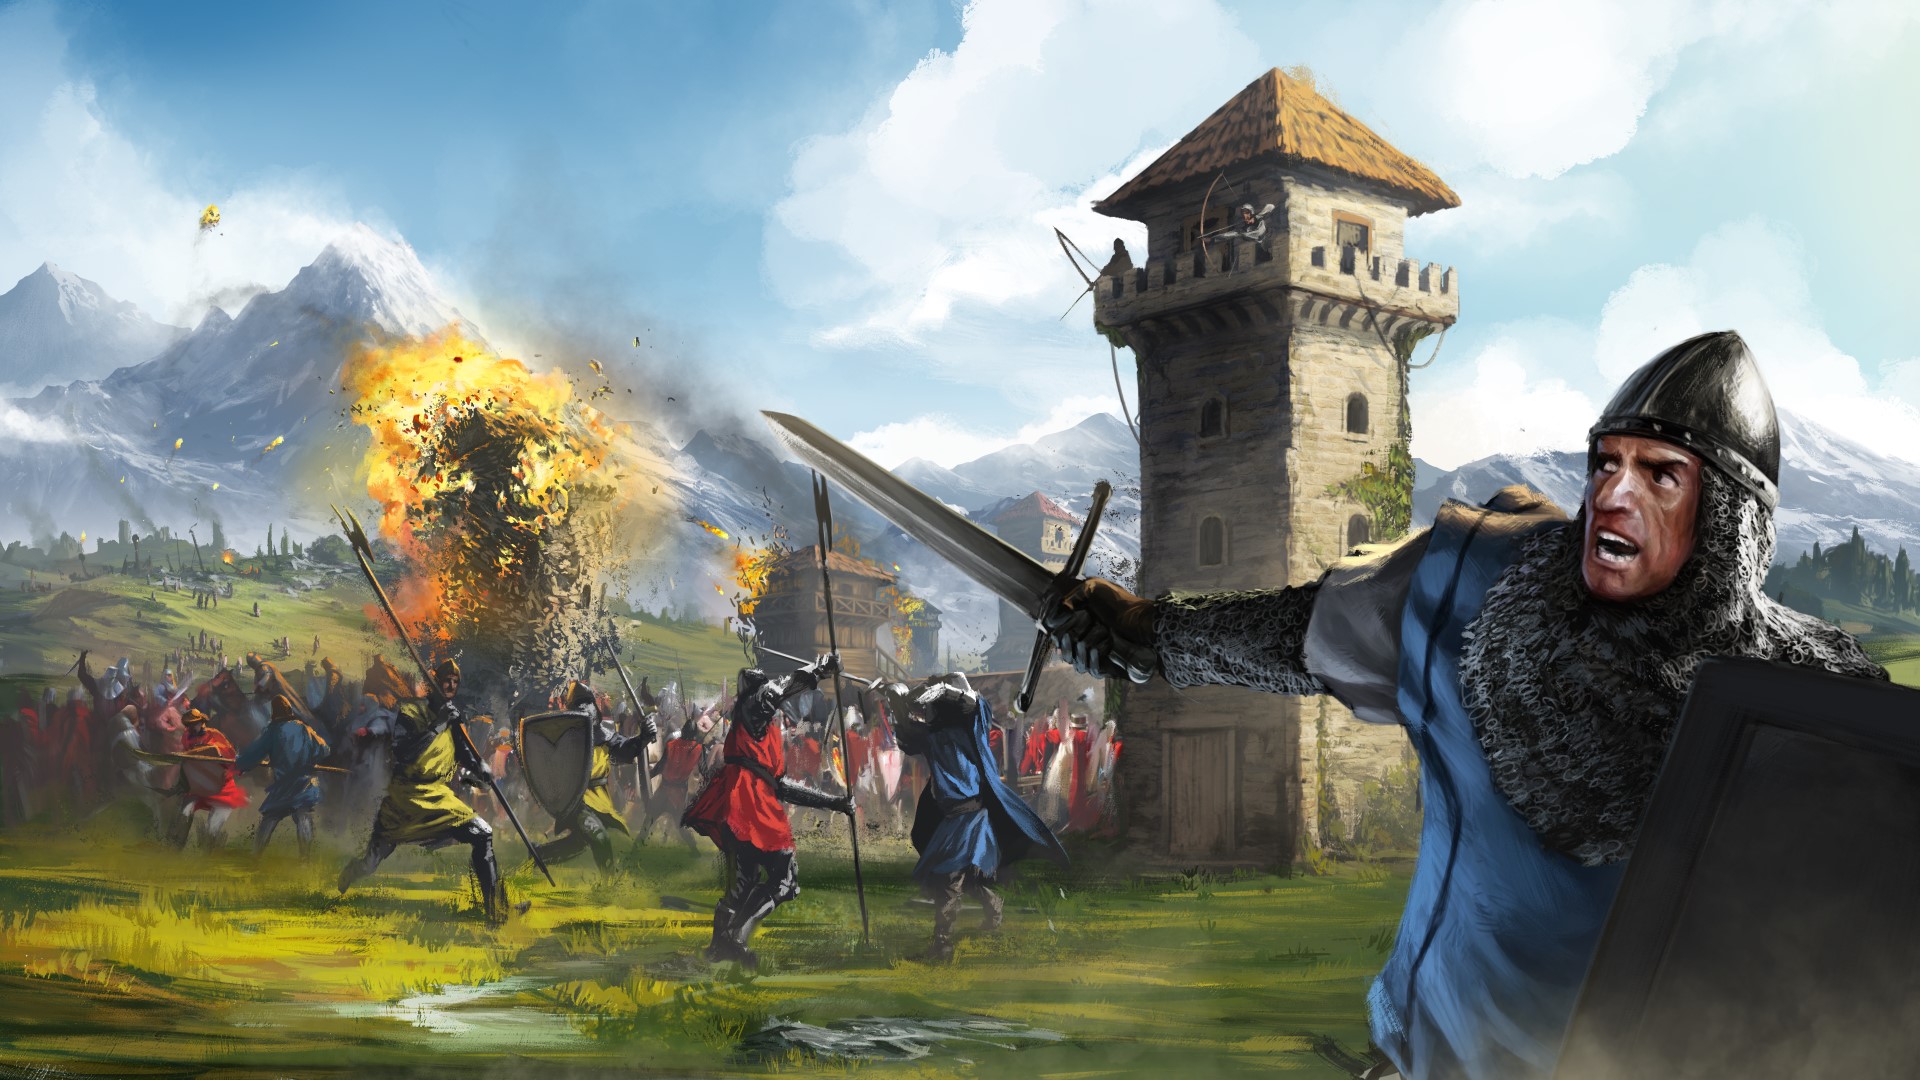 Video For Age of Empires II: Definitive Edition Anniversary Update Available Now, Featuring Battle Royale Mode